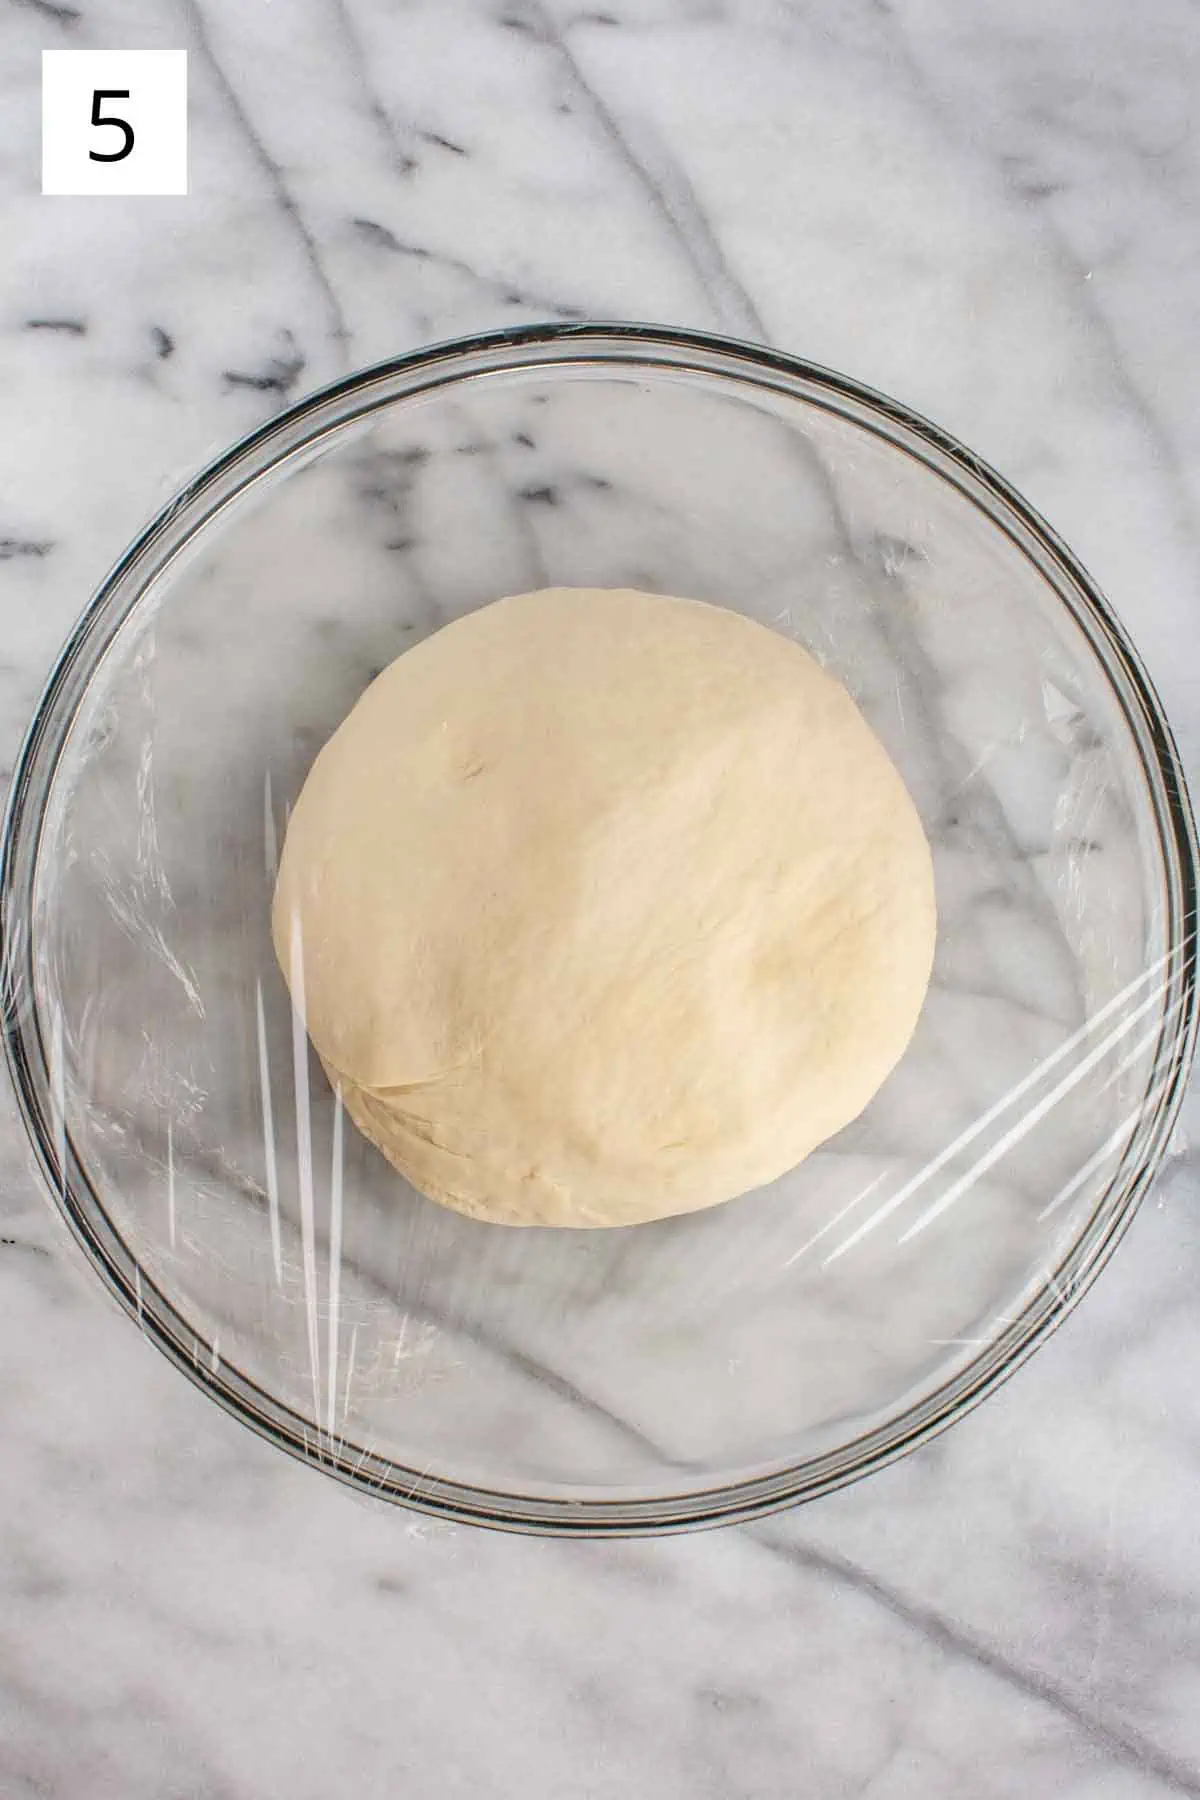 Uncooked Neapolitan pizza dough formed into a ball and placed in a mixing bowl.